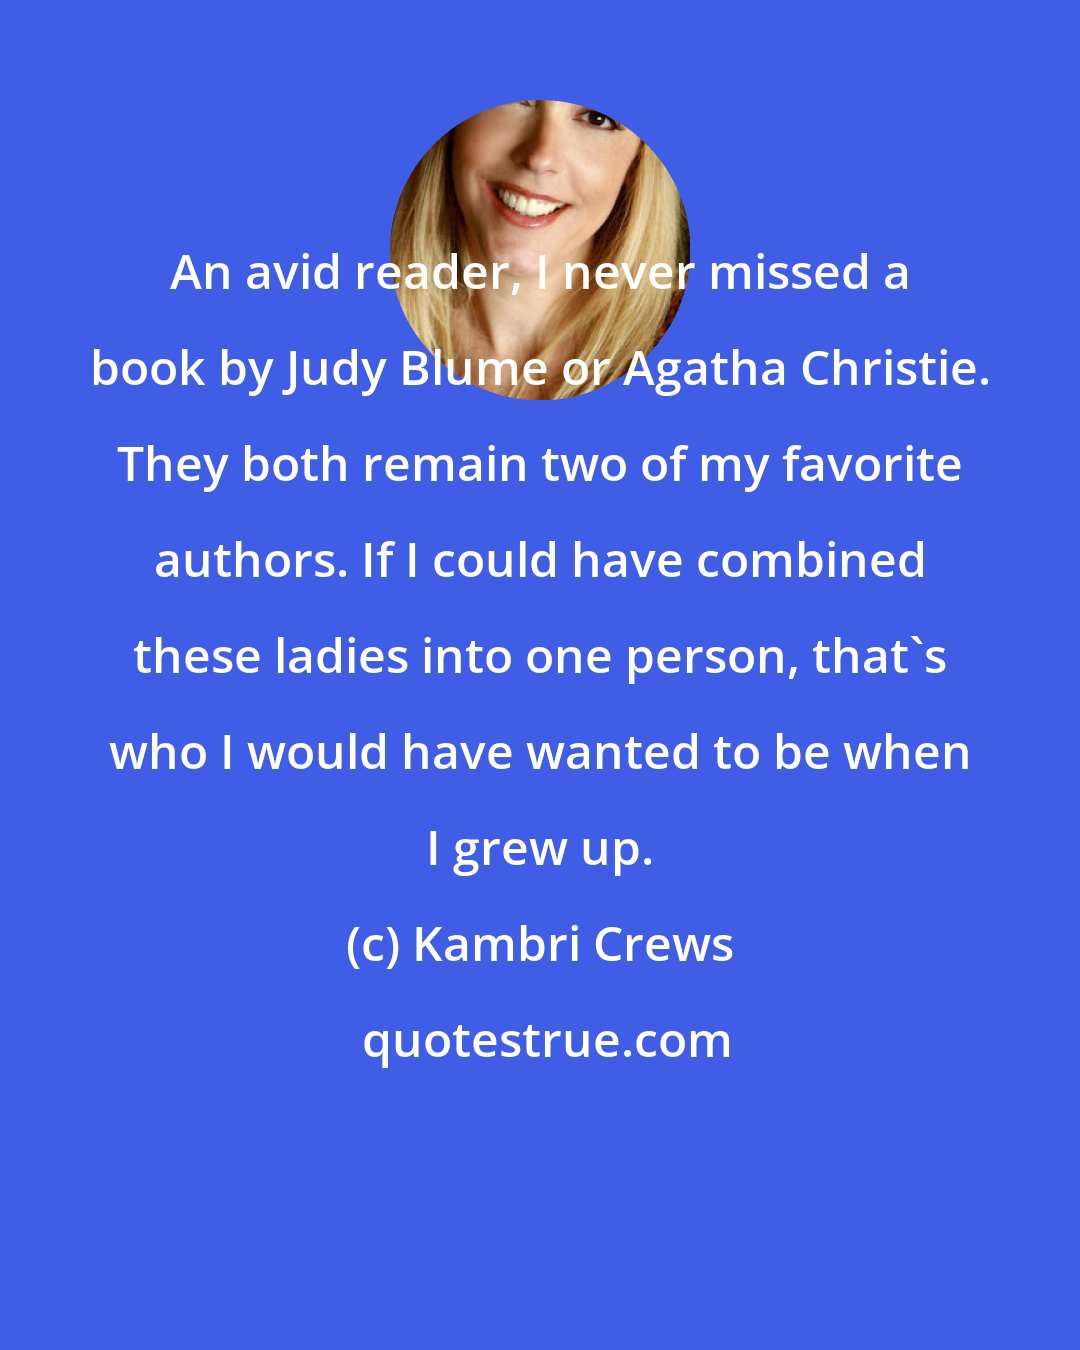 Kambri Crews: An avid reader, I never missed a book by Judy Blume or Agatha Christie. They both remain two of my favorite authors. If I could have combined these ladies into one person, that's who I would have wanted to be when I grew up.